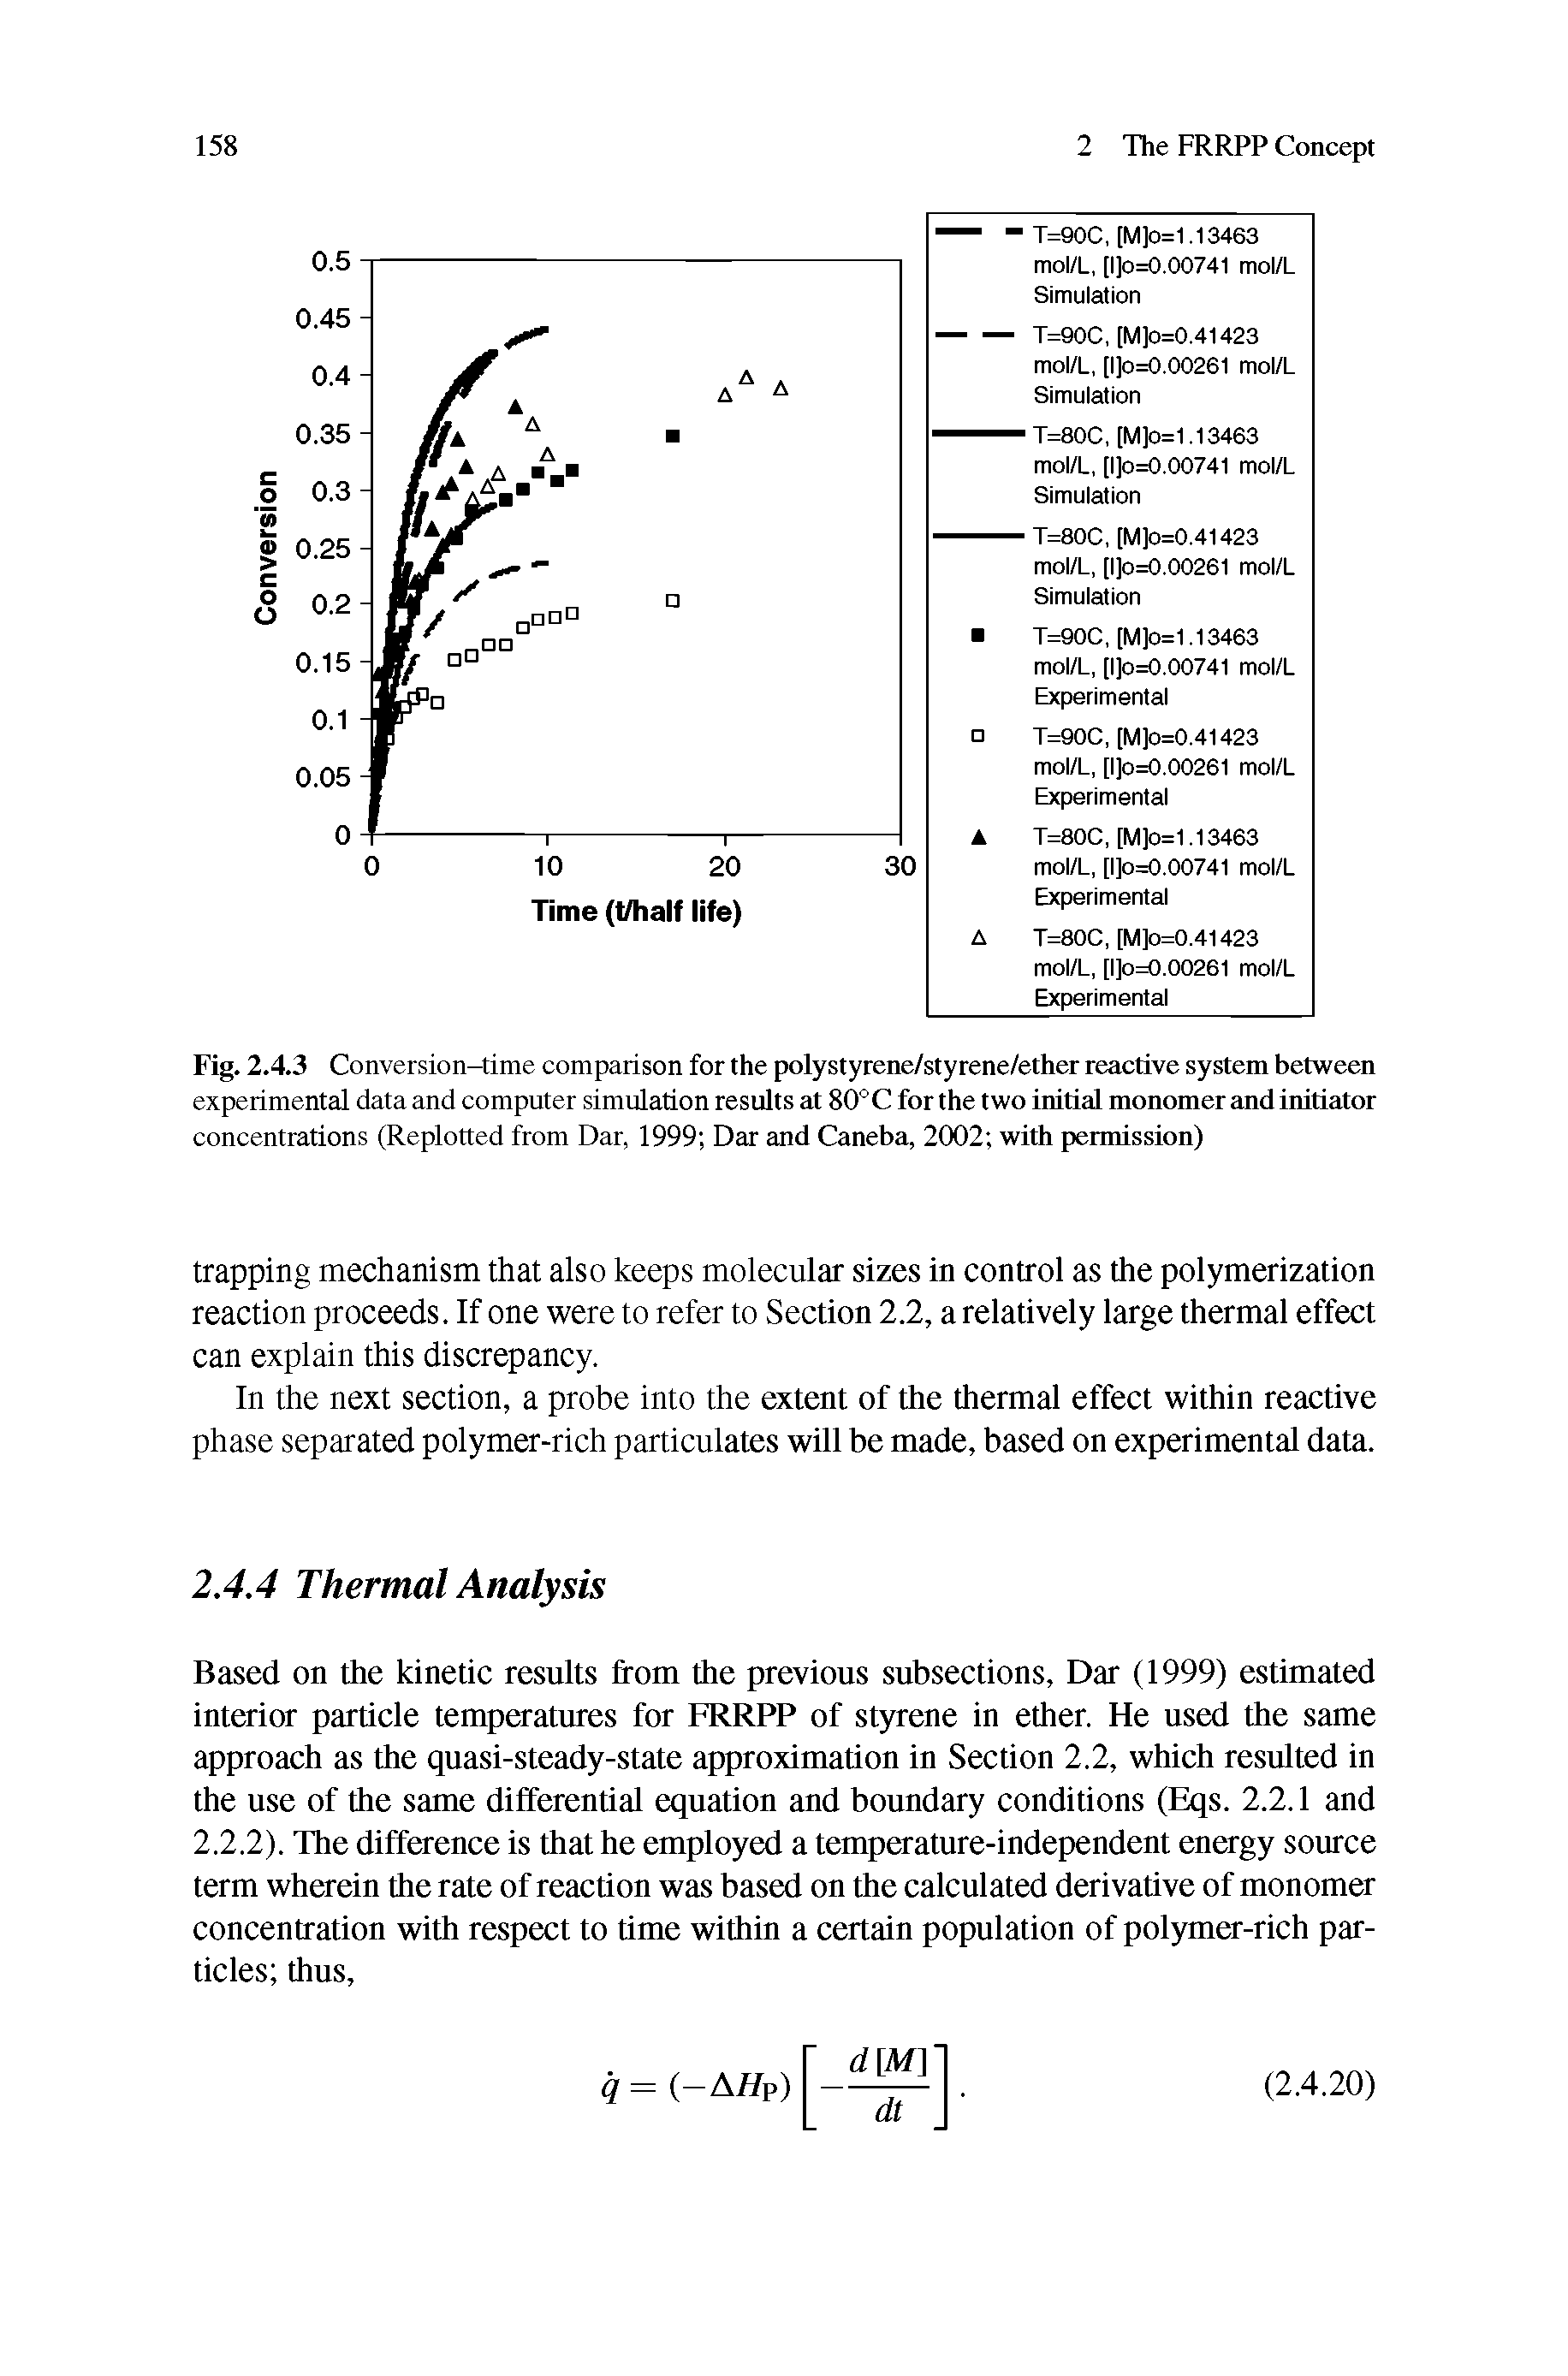 Fig. 2.4.3 Conversion-time comparison for the polystyrene/styrene/ether reactive system between experimental data and computer simulation results at 80°C for the two initial monomer and initiator concentrations (Replotted from Dar, 1999 Dar and Caneba, 2002 with permission)...